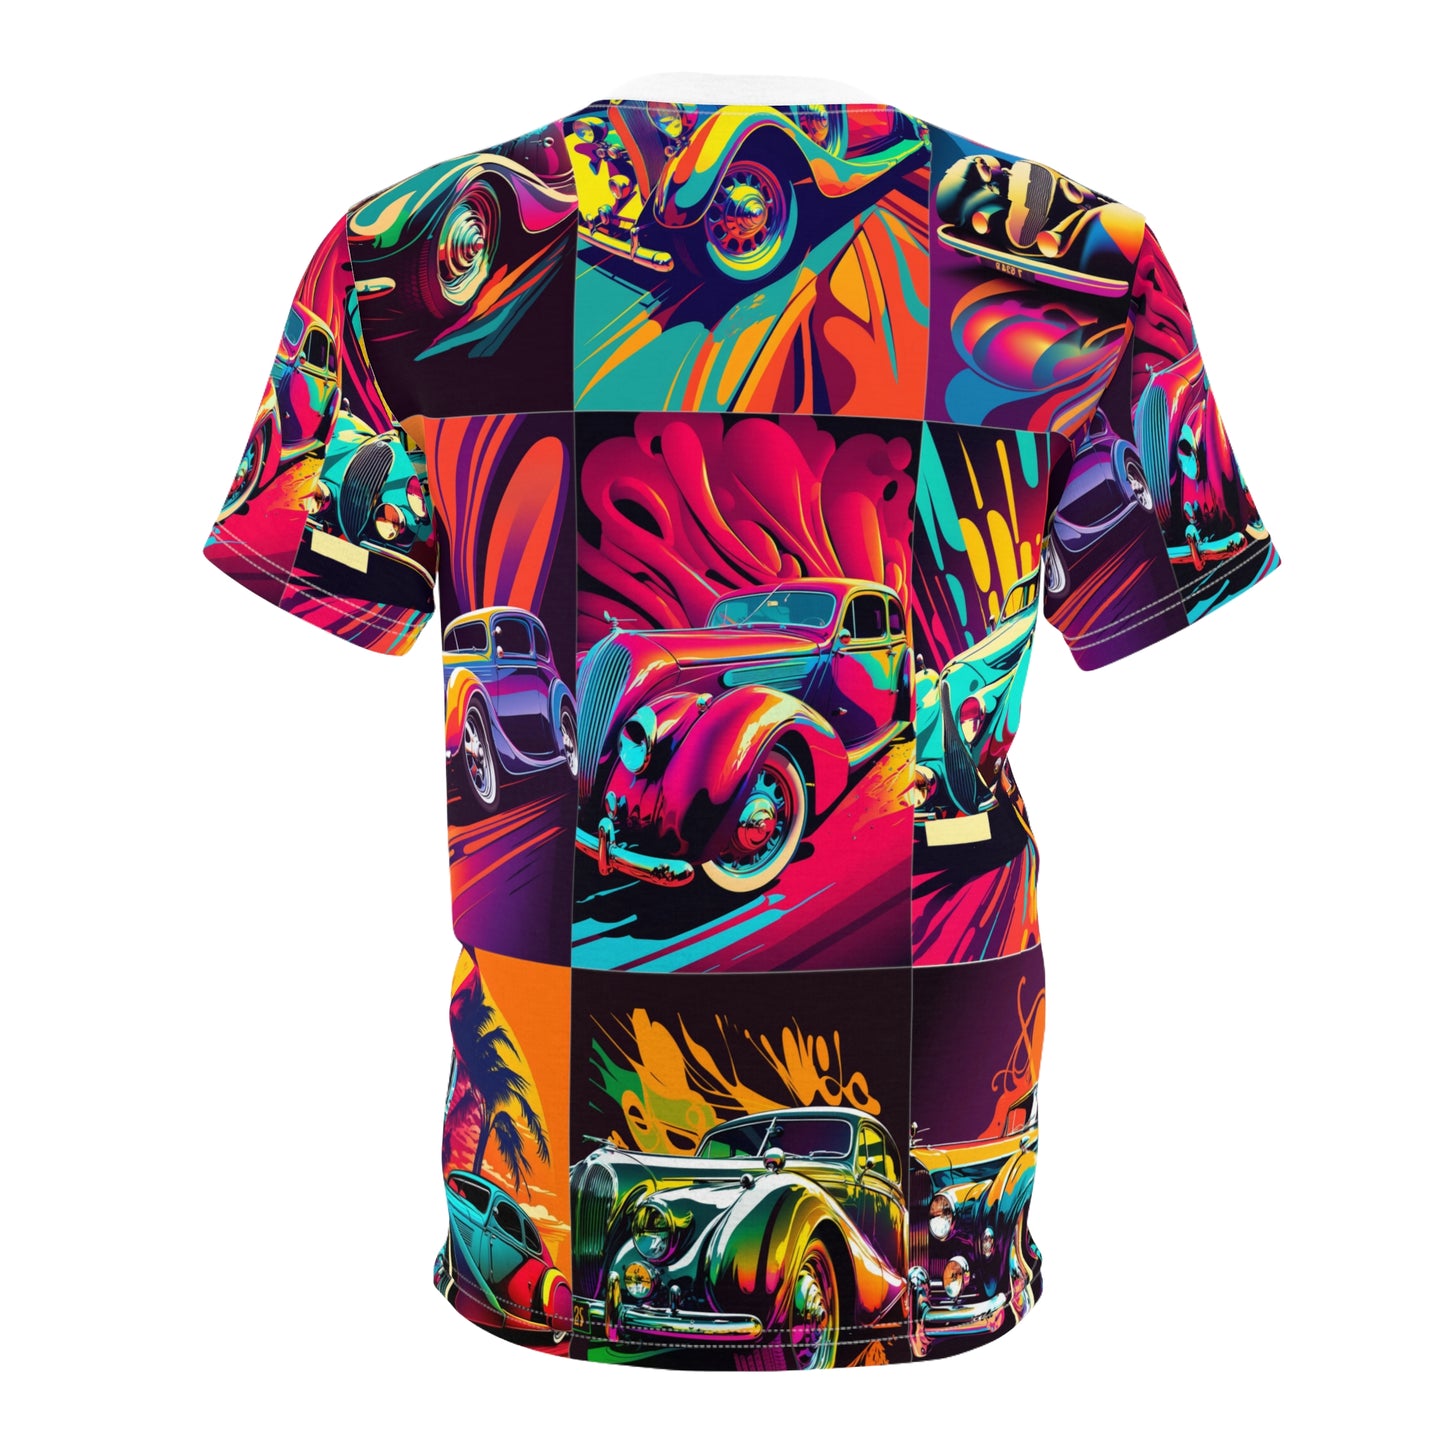 Abstract Style, Classic Cars, Retro Cars, Unisex Cut & Sew Tee